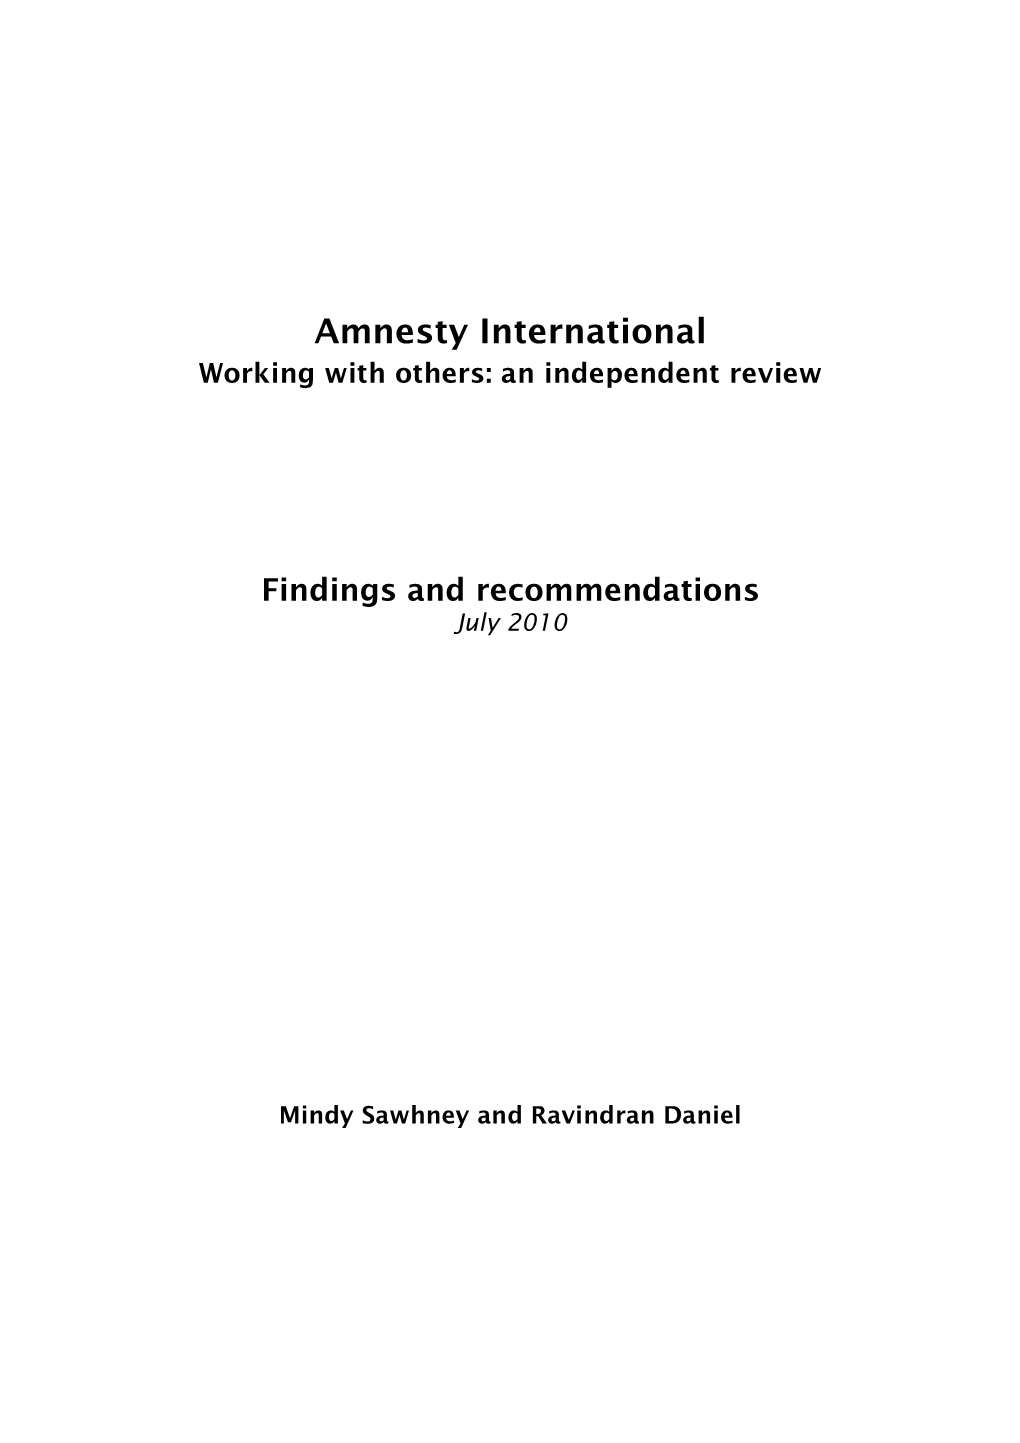 Amnesty International Working with Others: an Independent Review